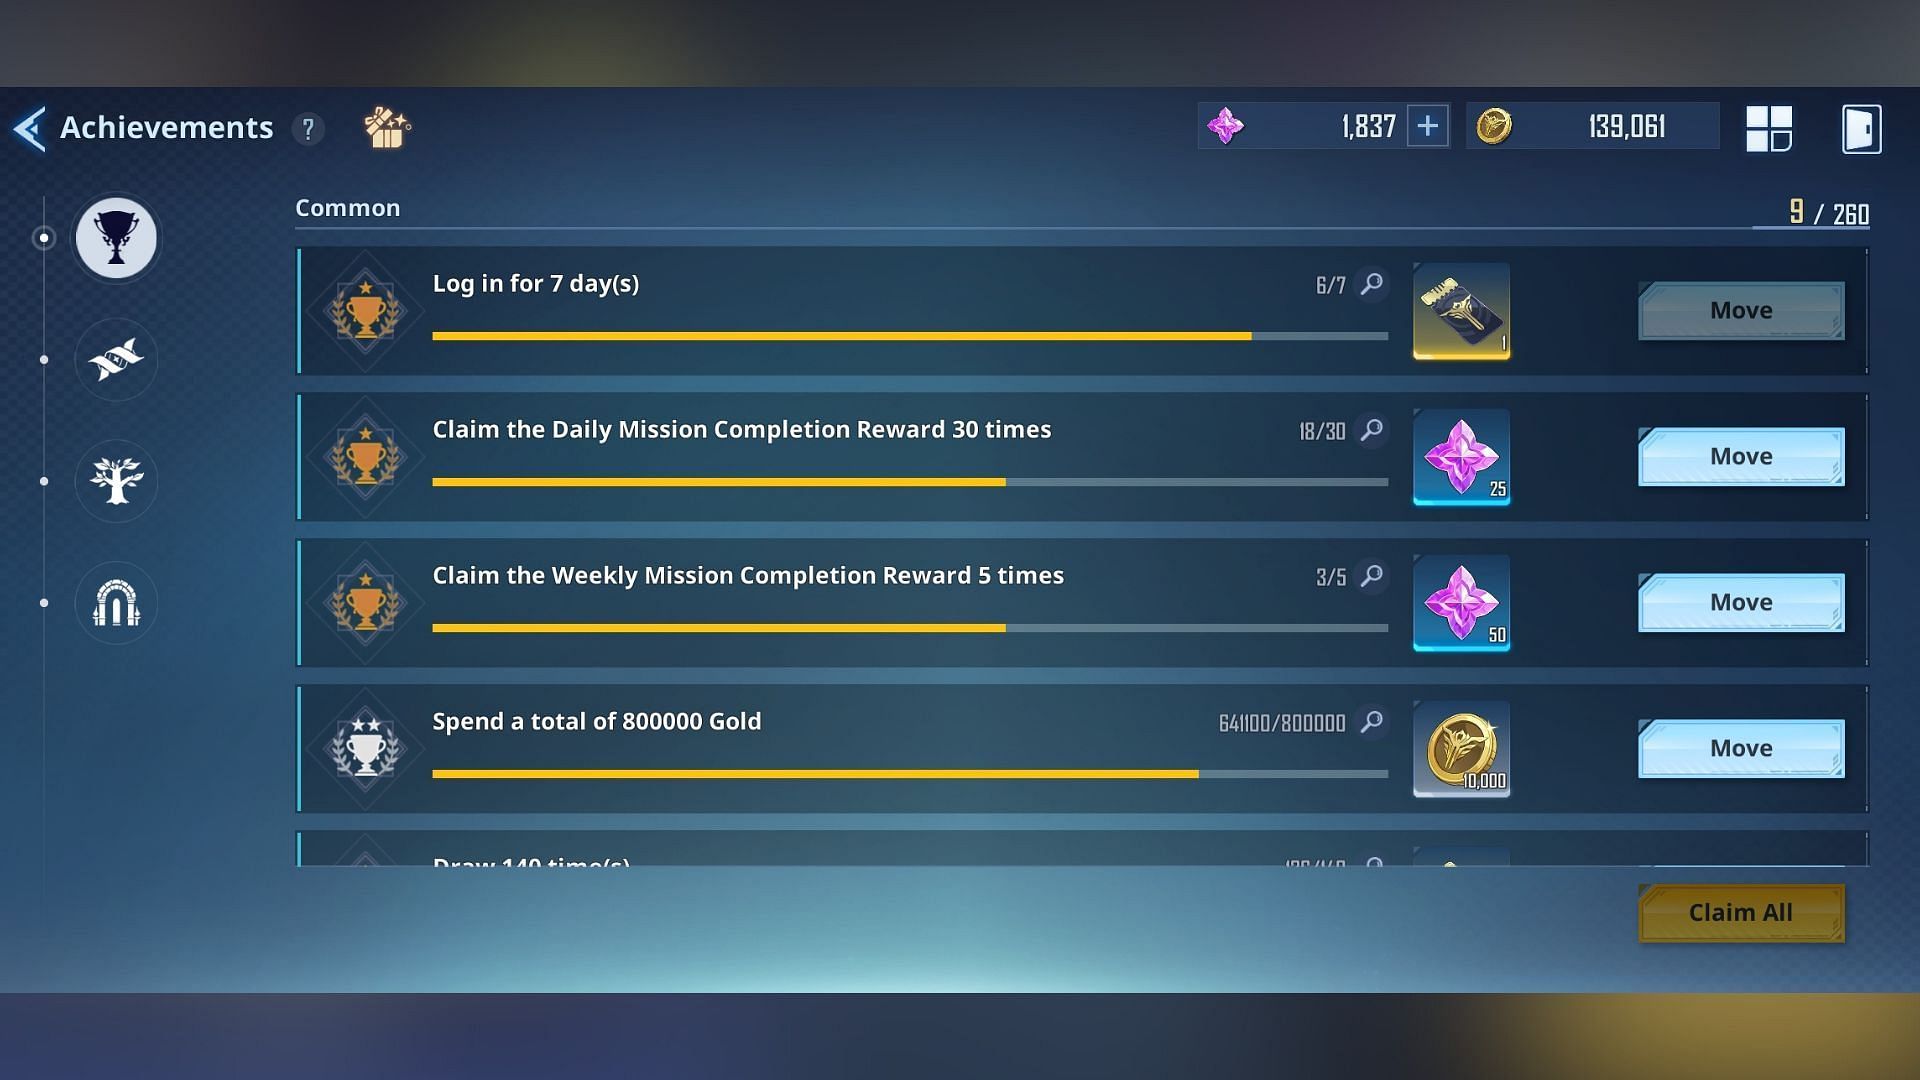 Several missions in Achievements grant Draw Tickets as rewards upon completion (Image via Netmarble)